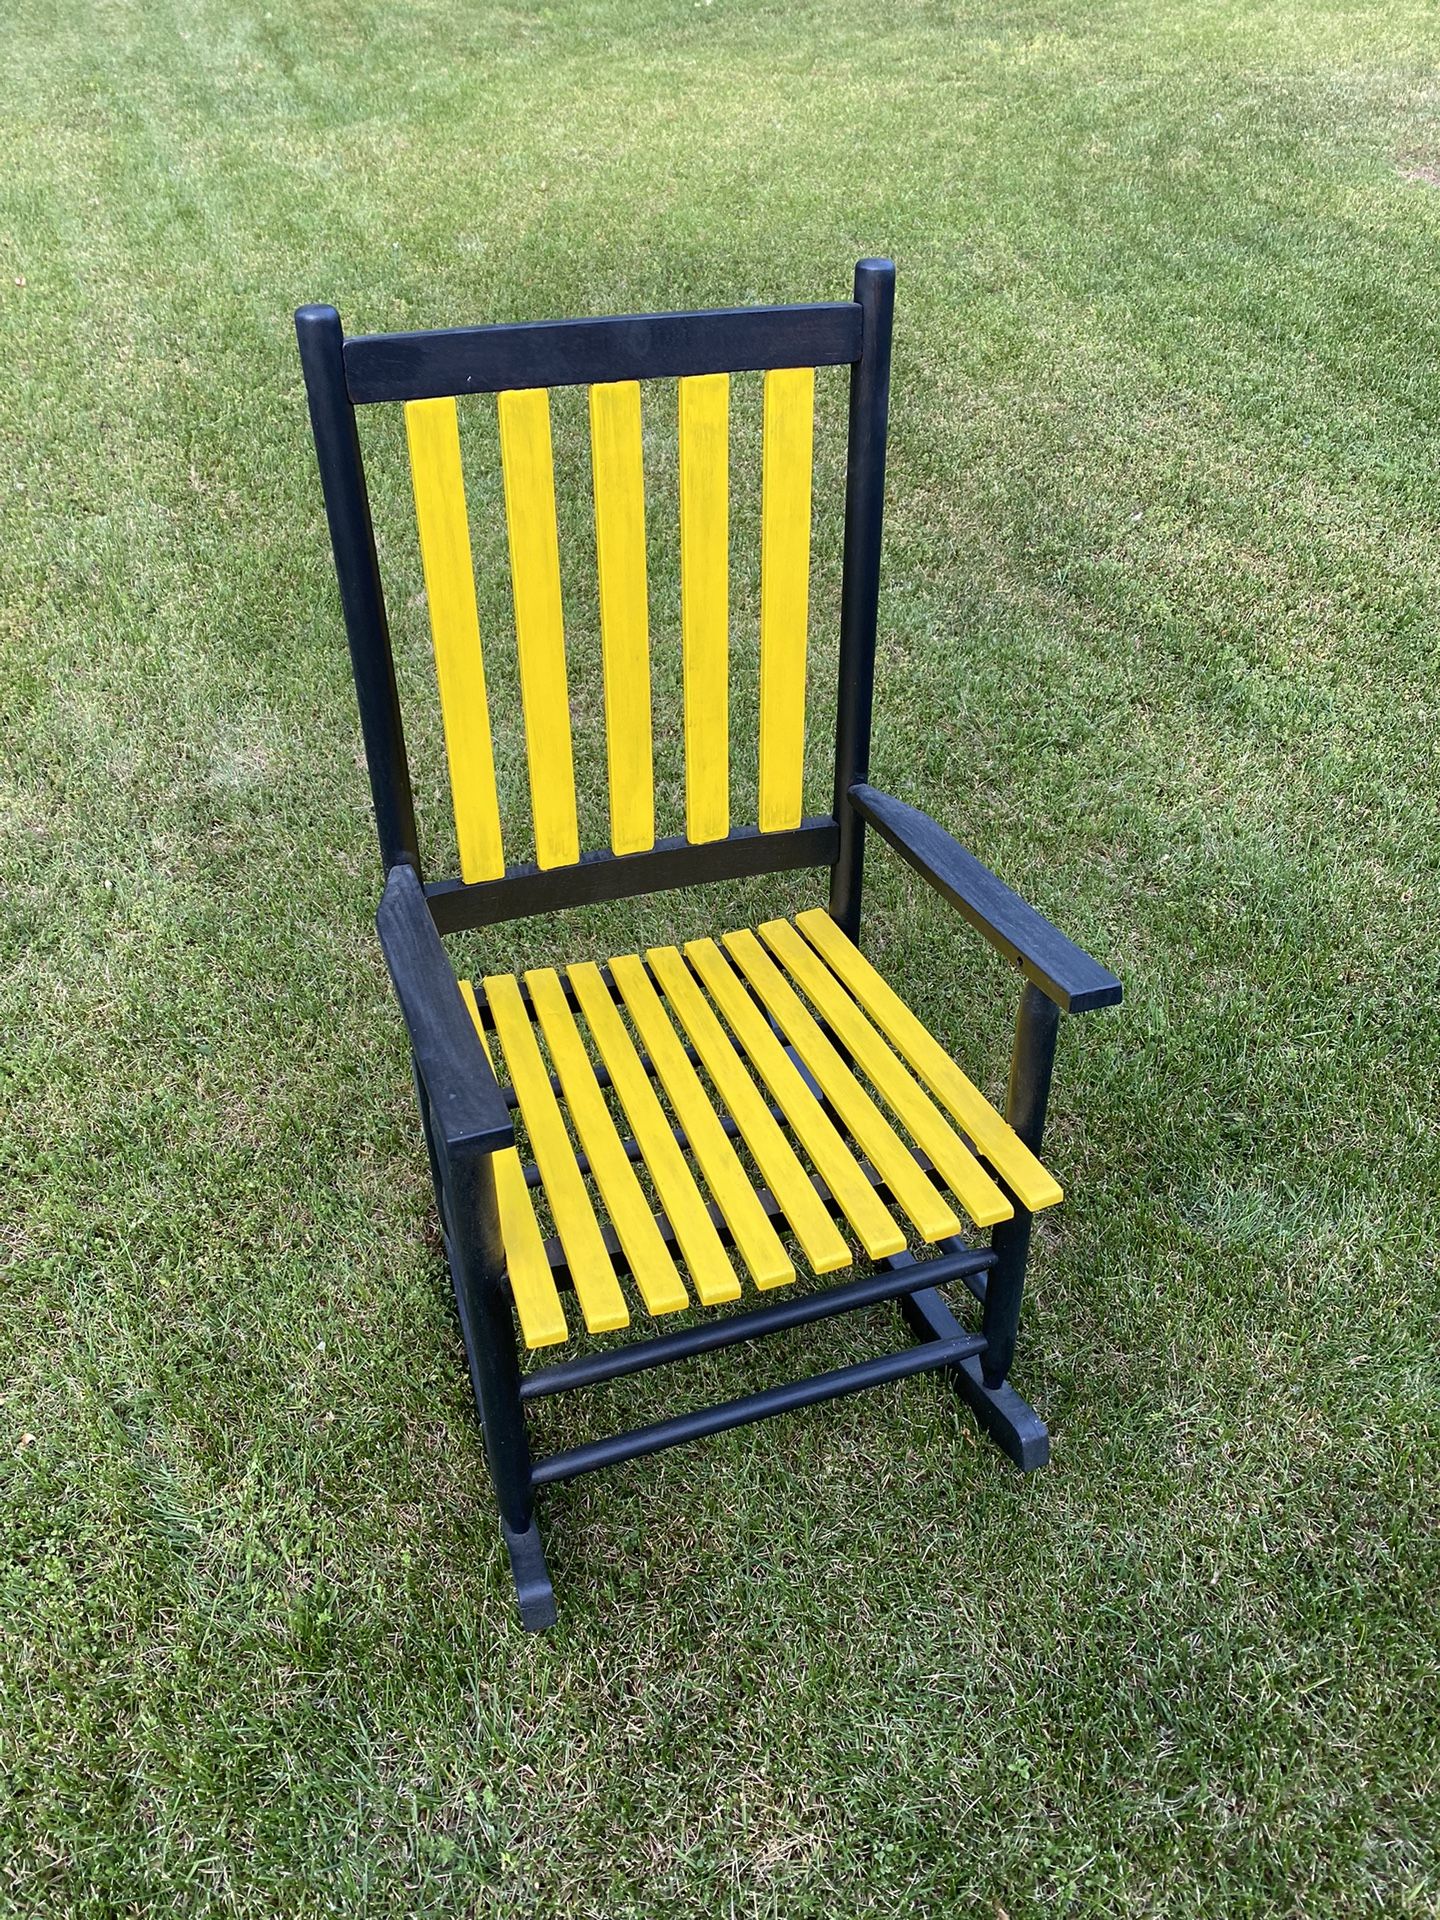 Refinished Rocking Chair